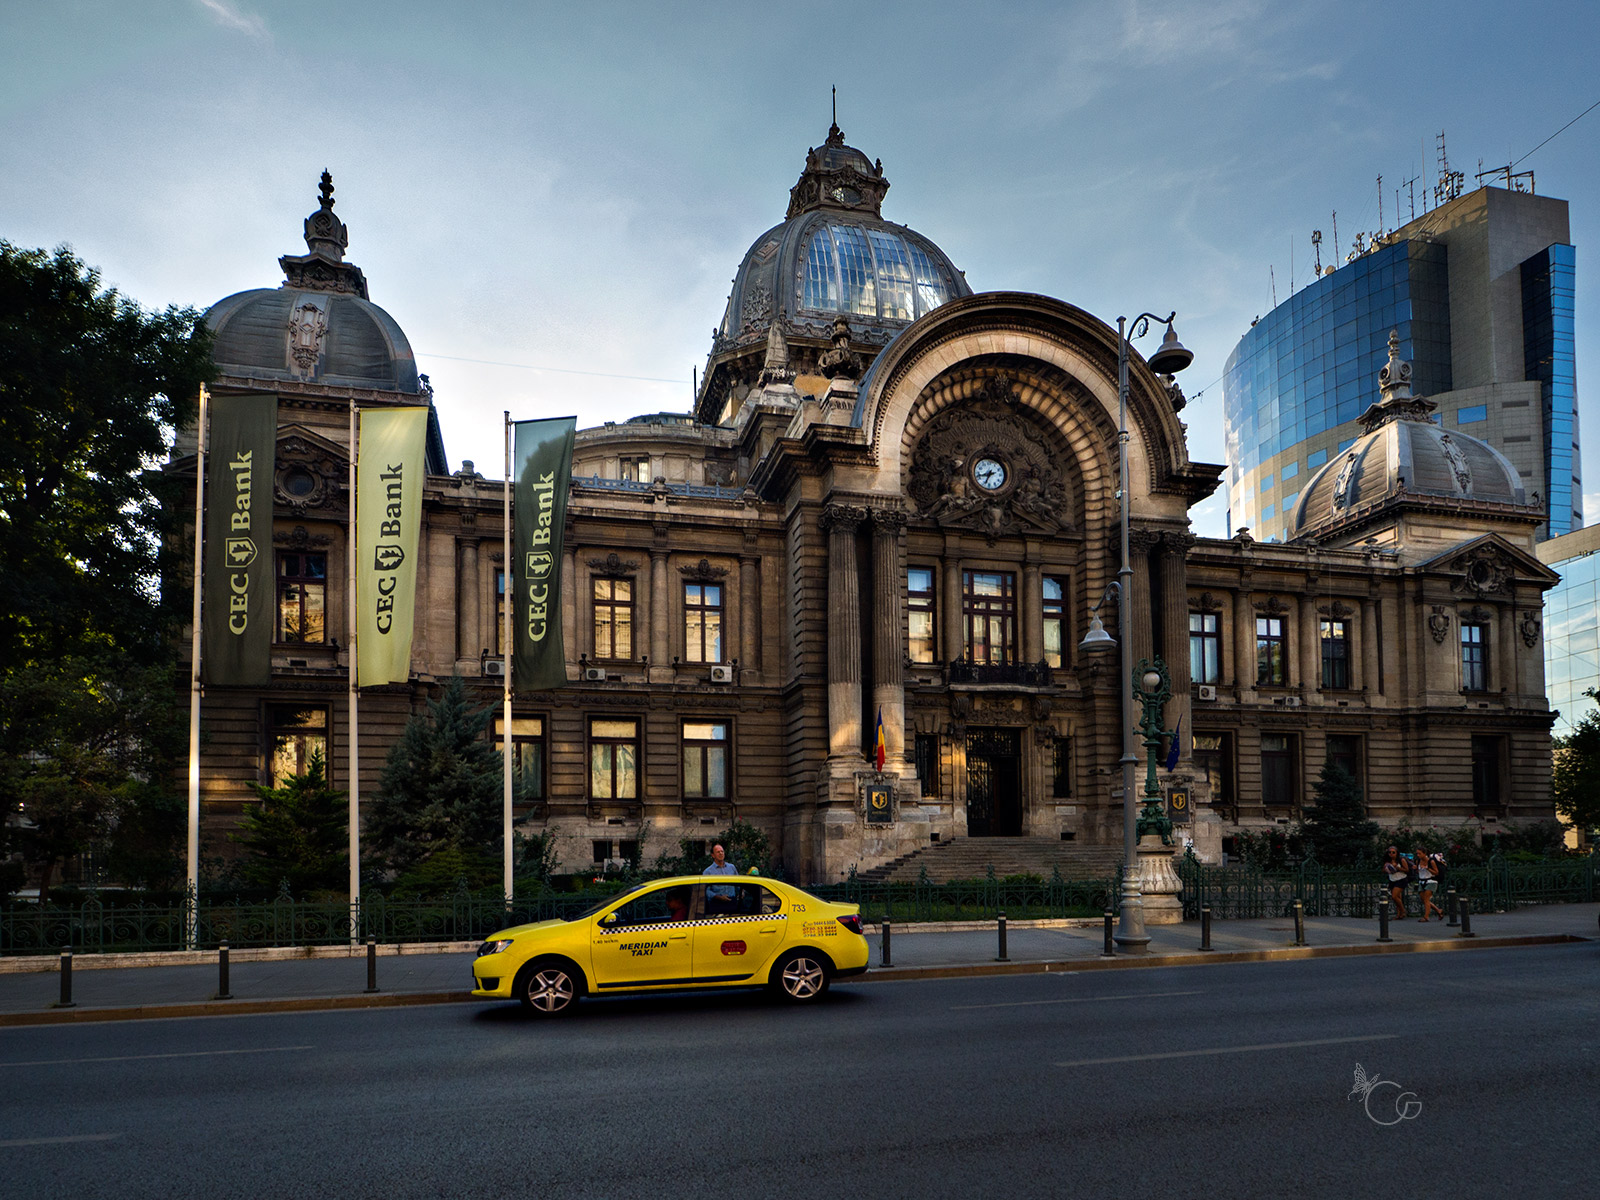 The yellow taxi - bucarest...